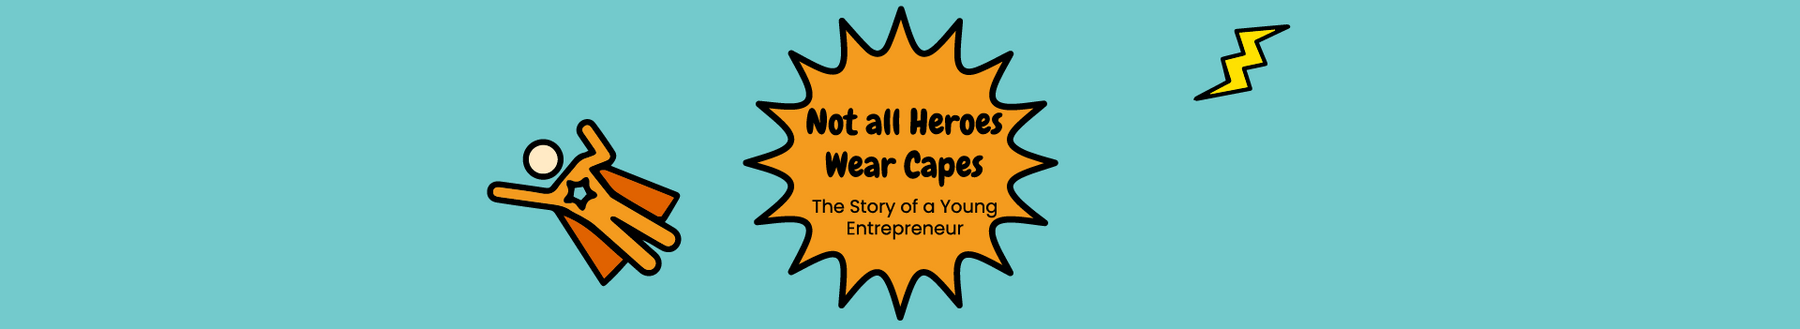 Not all Heroes Wear Capes - The Story of a Young Entrepreneur